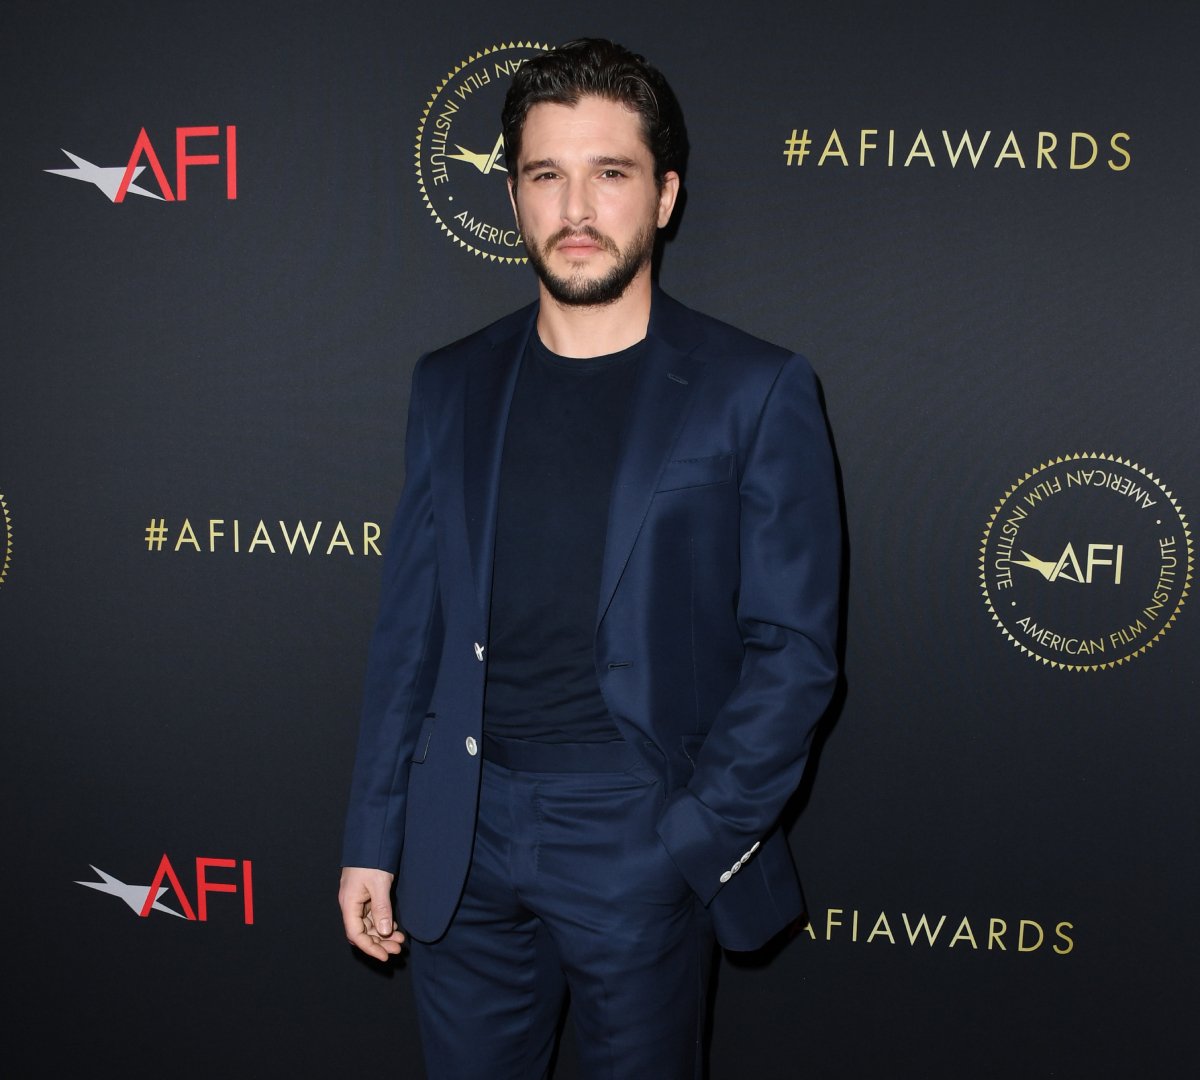 Kit Harington attends the 20th Annual AFI Awards at Four Seasons Hotel Los Angeles at Beverly Hills on January 03, 2020 in Los Angeles, California